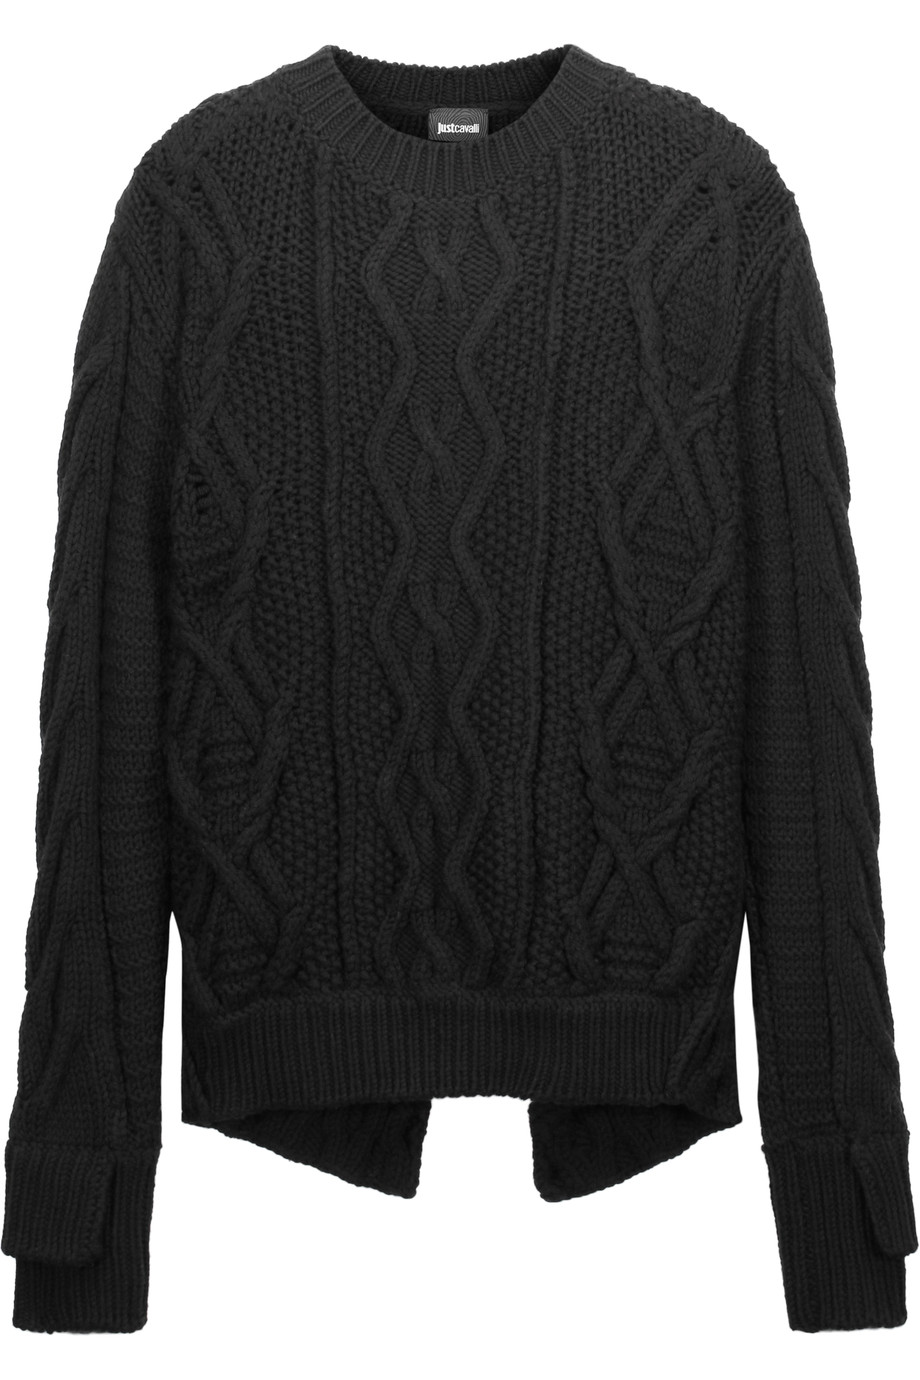 Just Cavalli Cable-knit Wool Sweater | ModeSens